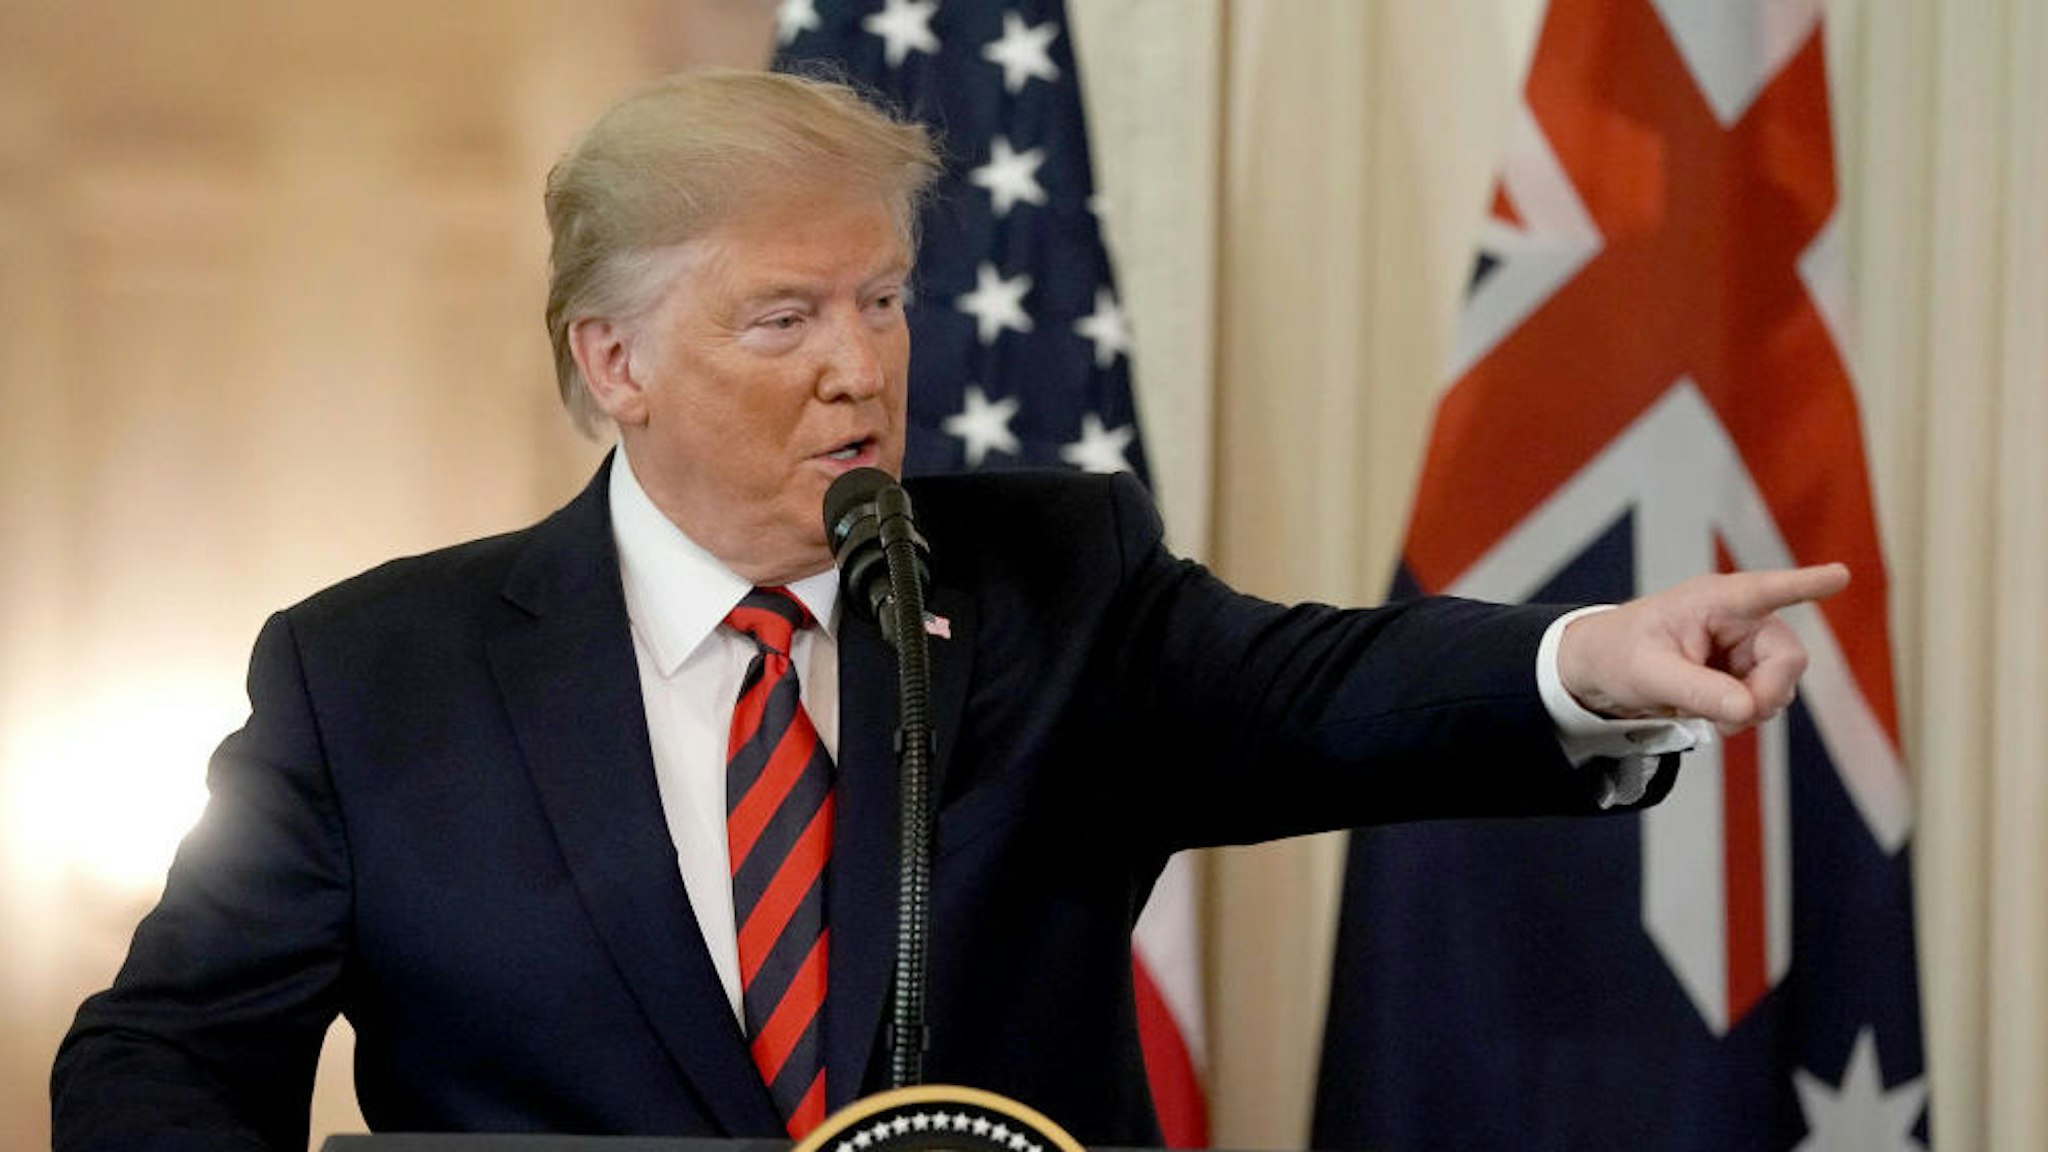 U.S. President Donald Trump participates in a joint news conference with Australian Prime Minister Scott Morrison in the East Room of the White House September 20, 2019 in Washington, DC.